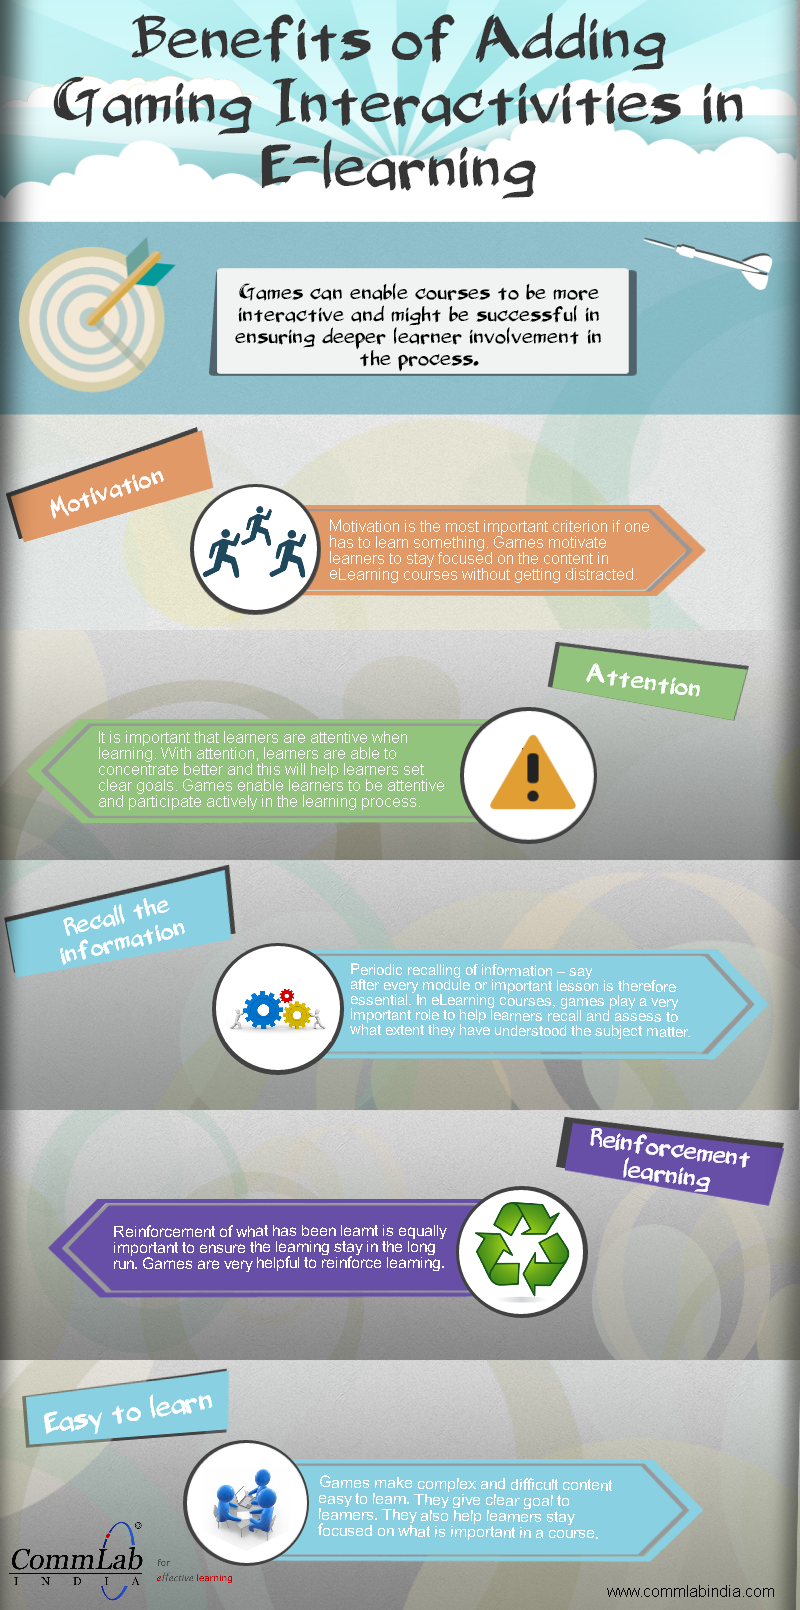 Benefits of Adding Game-Based Interactivities in E-learning – An Infographic